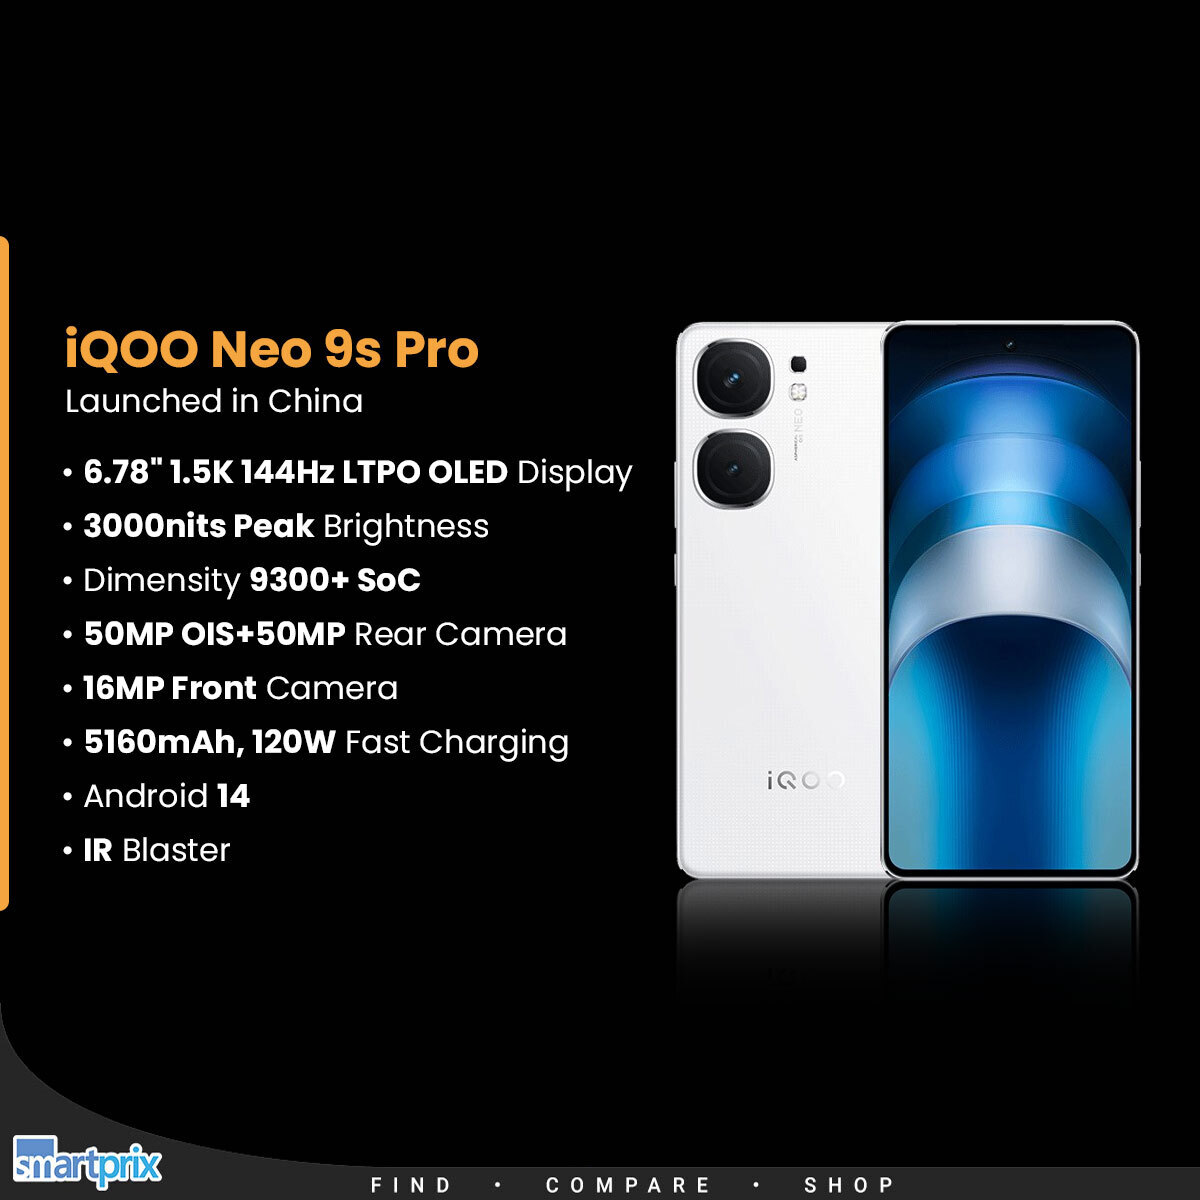 iQOO Neo 9s Pro launched in China  smpx.to/YF9MjT Would you like to see this powerhouse device make its way to India? #iQOO #iQOONeo9sPro